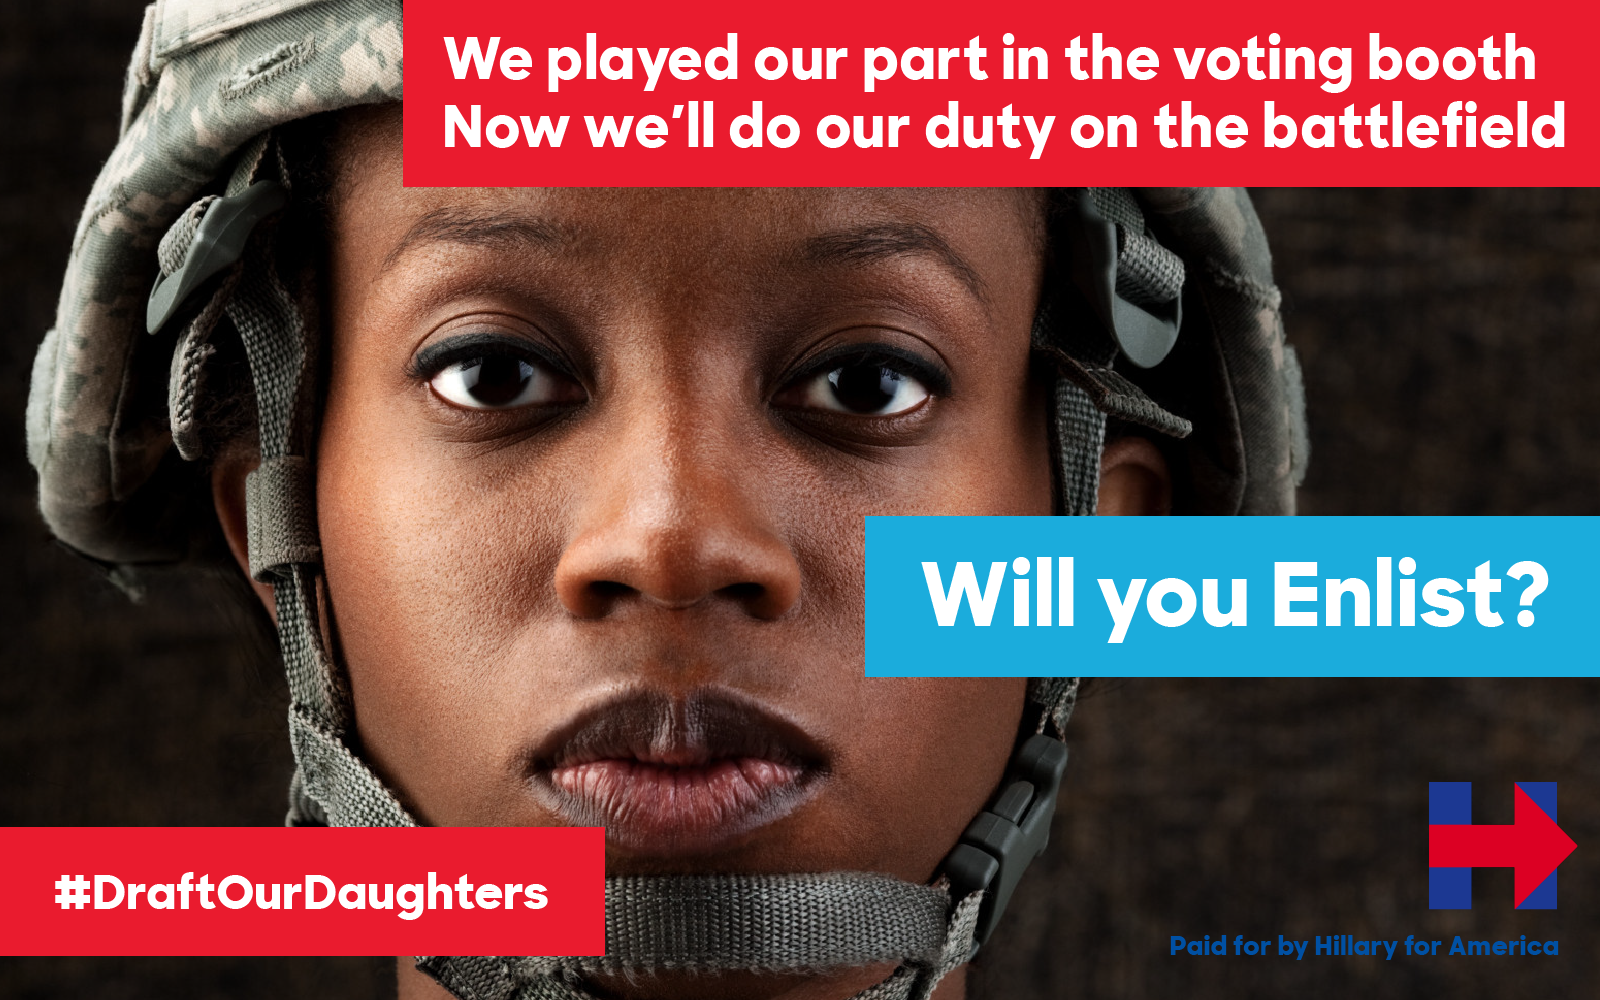 We played our part in the voting booth. Now we'll do our duty on the battlefield. #DraftOurDaughters